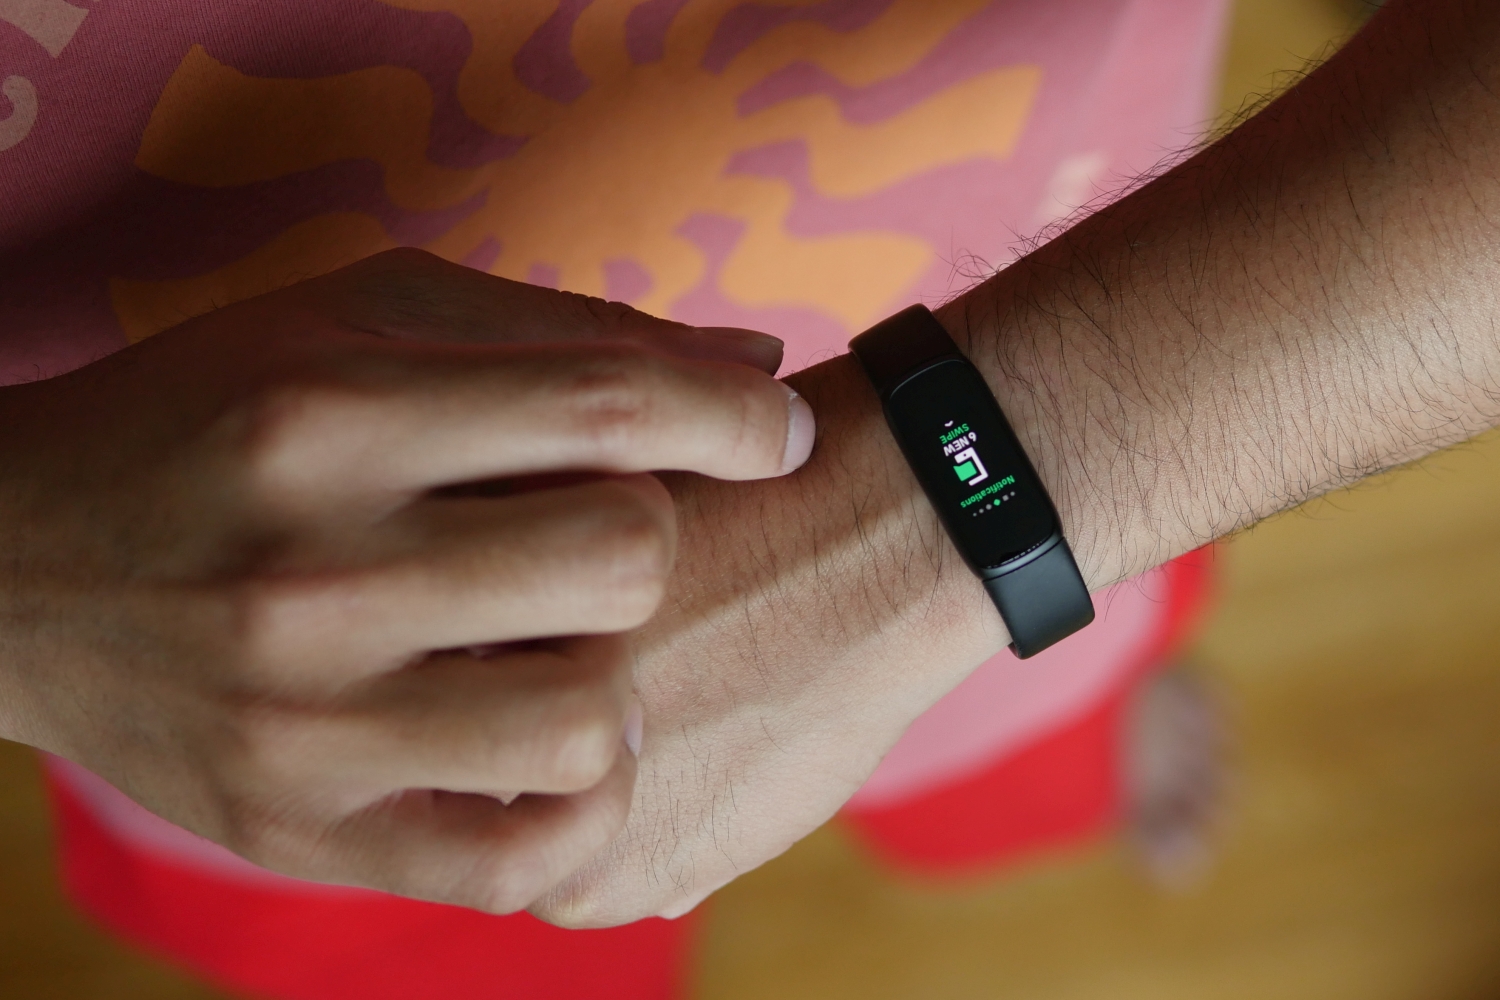 Fitbit Luxe embodies whole mind & body in a sleek new design